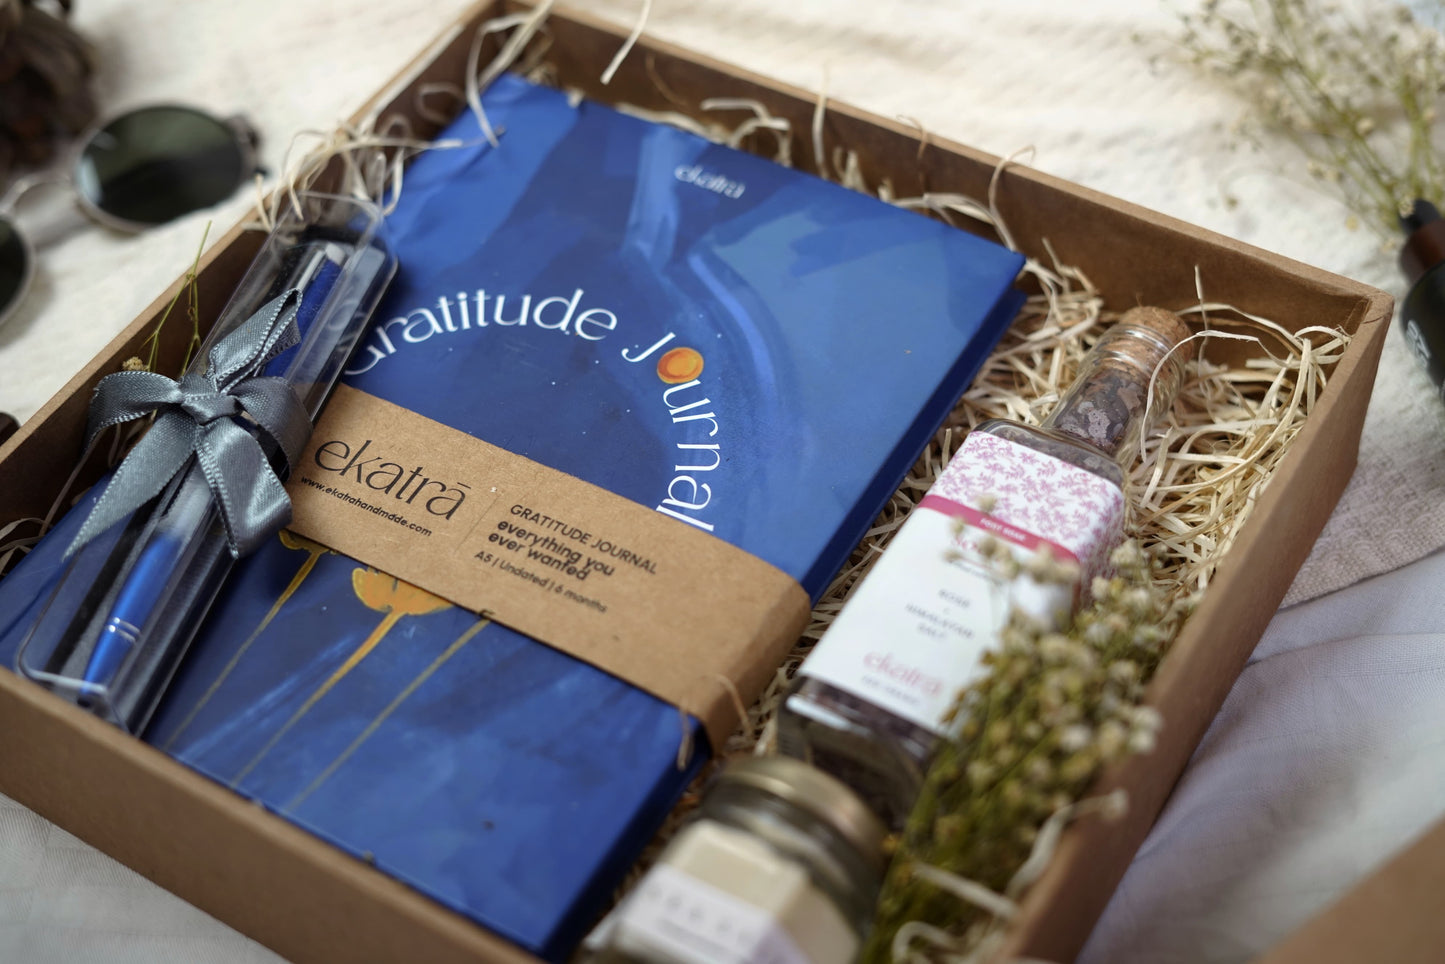 Ekatra Wellbeing Hamper - Soothing and calm